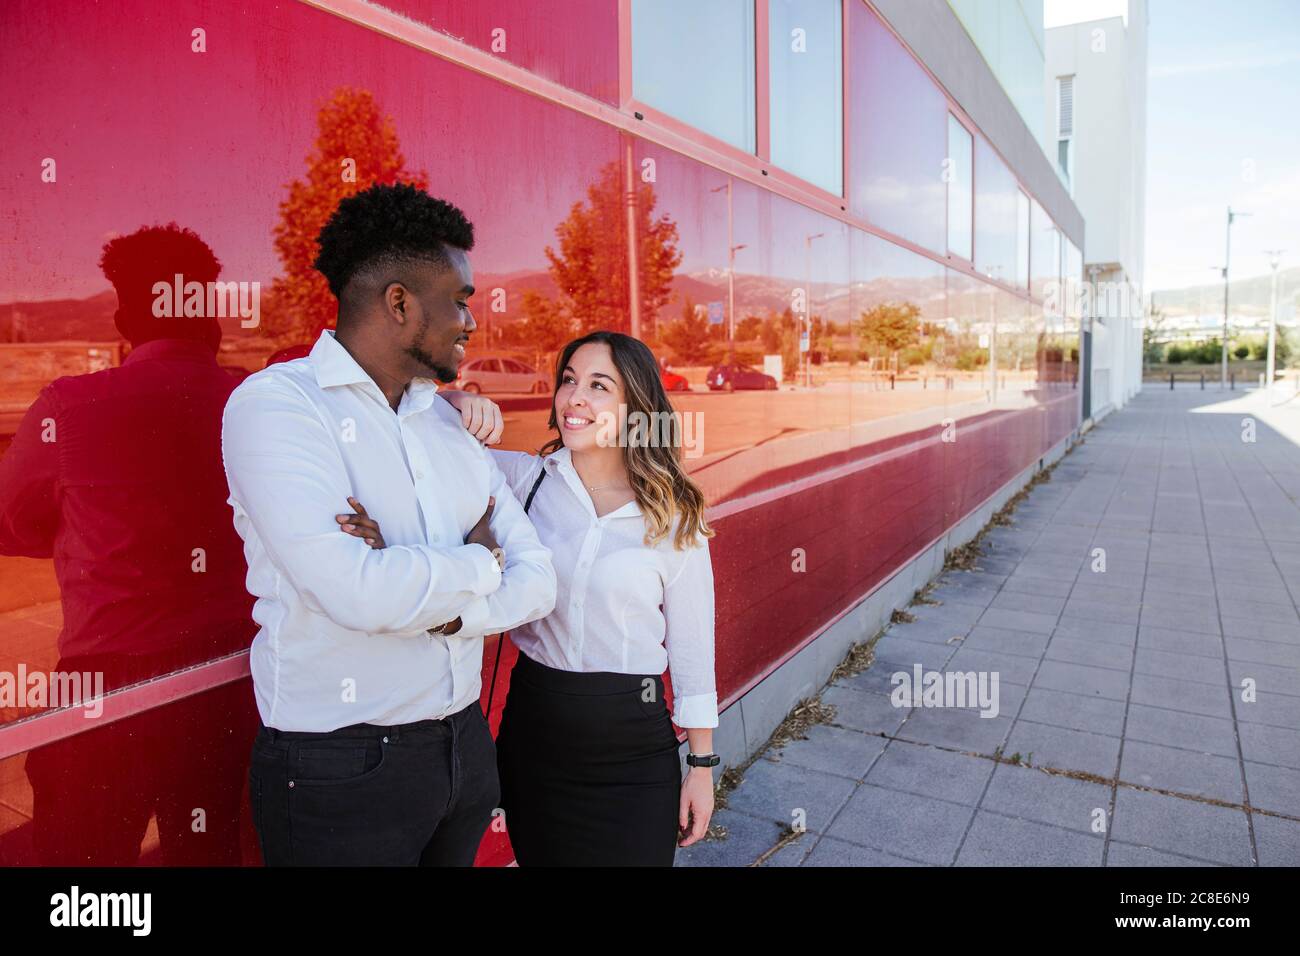 Multi ethnic colleagues talking while standing by red wall in city Stock Photo